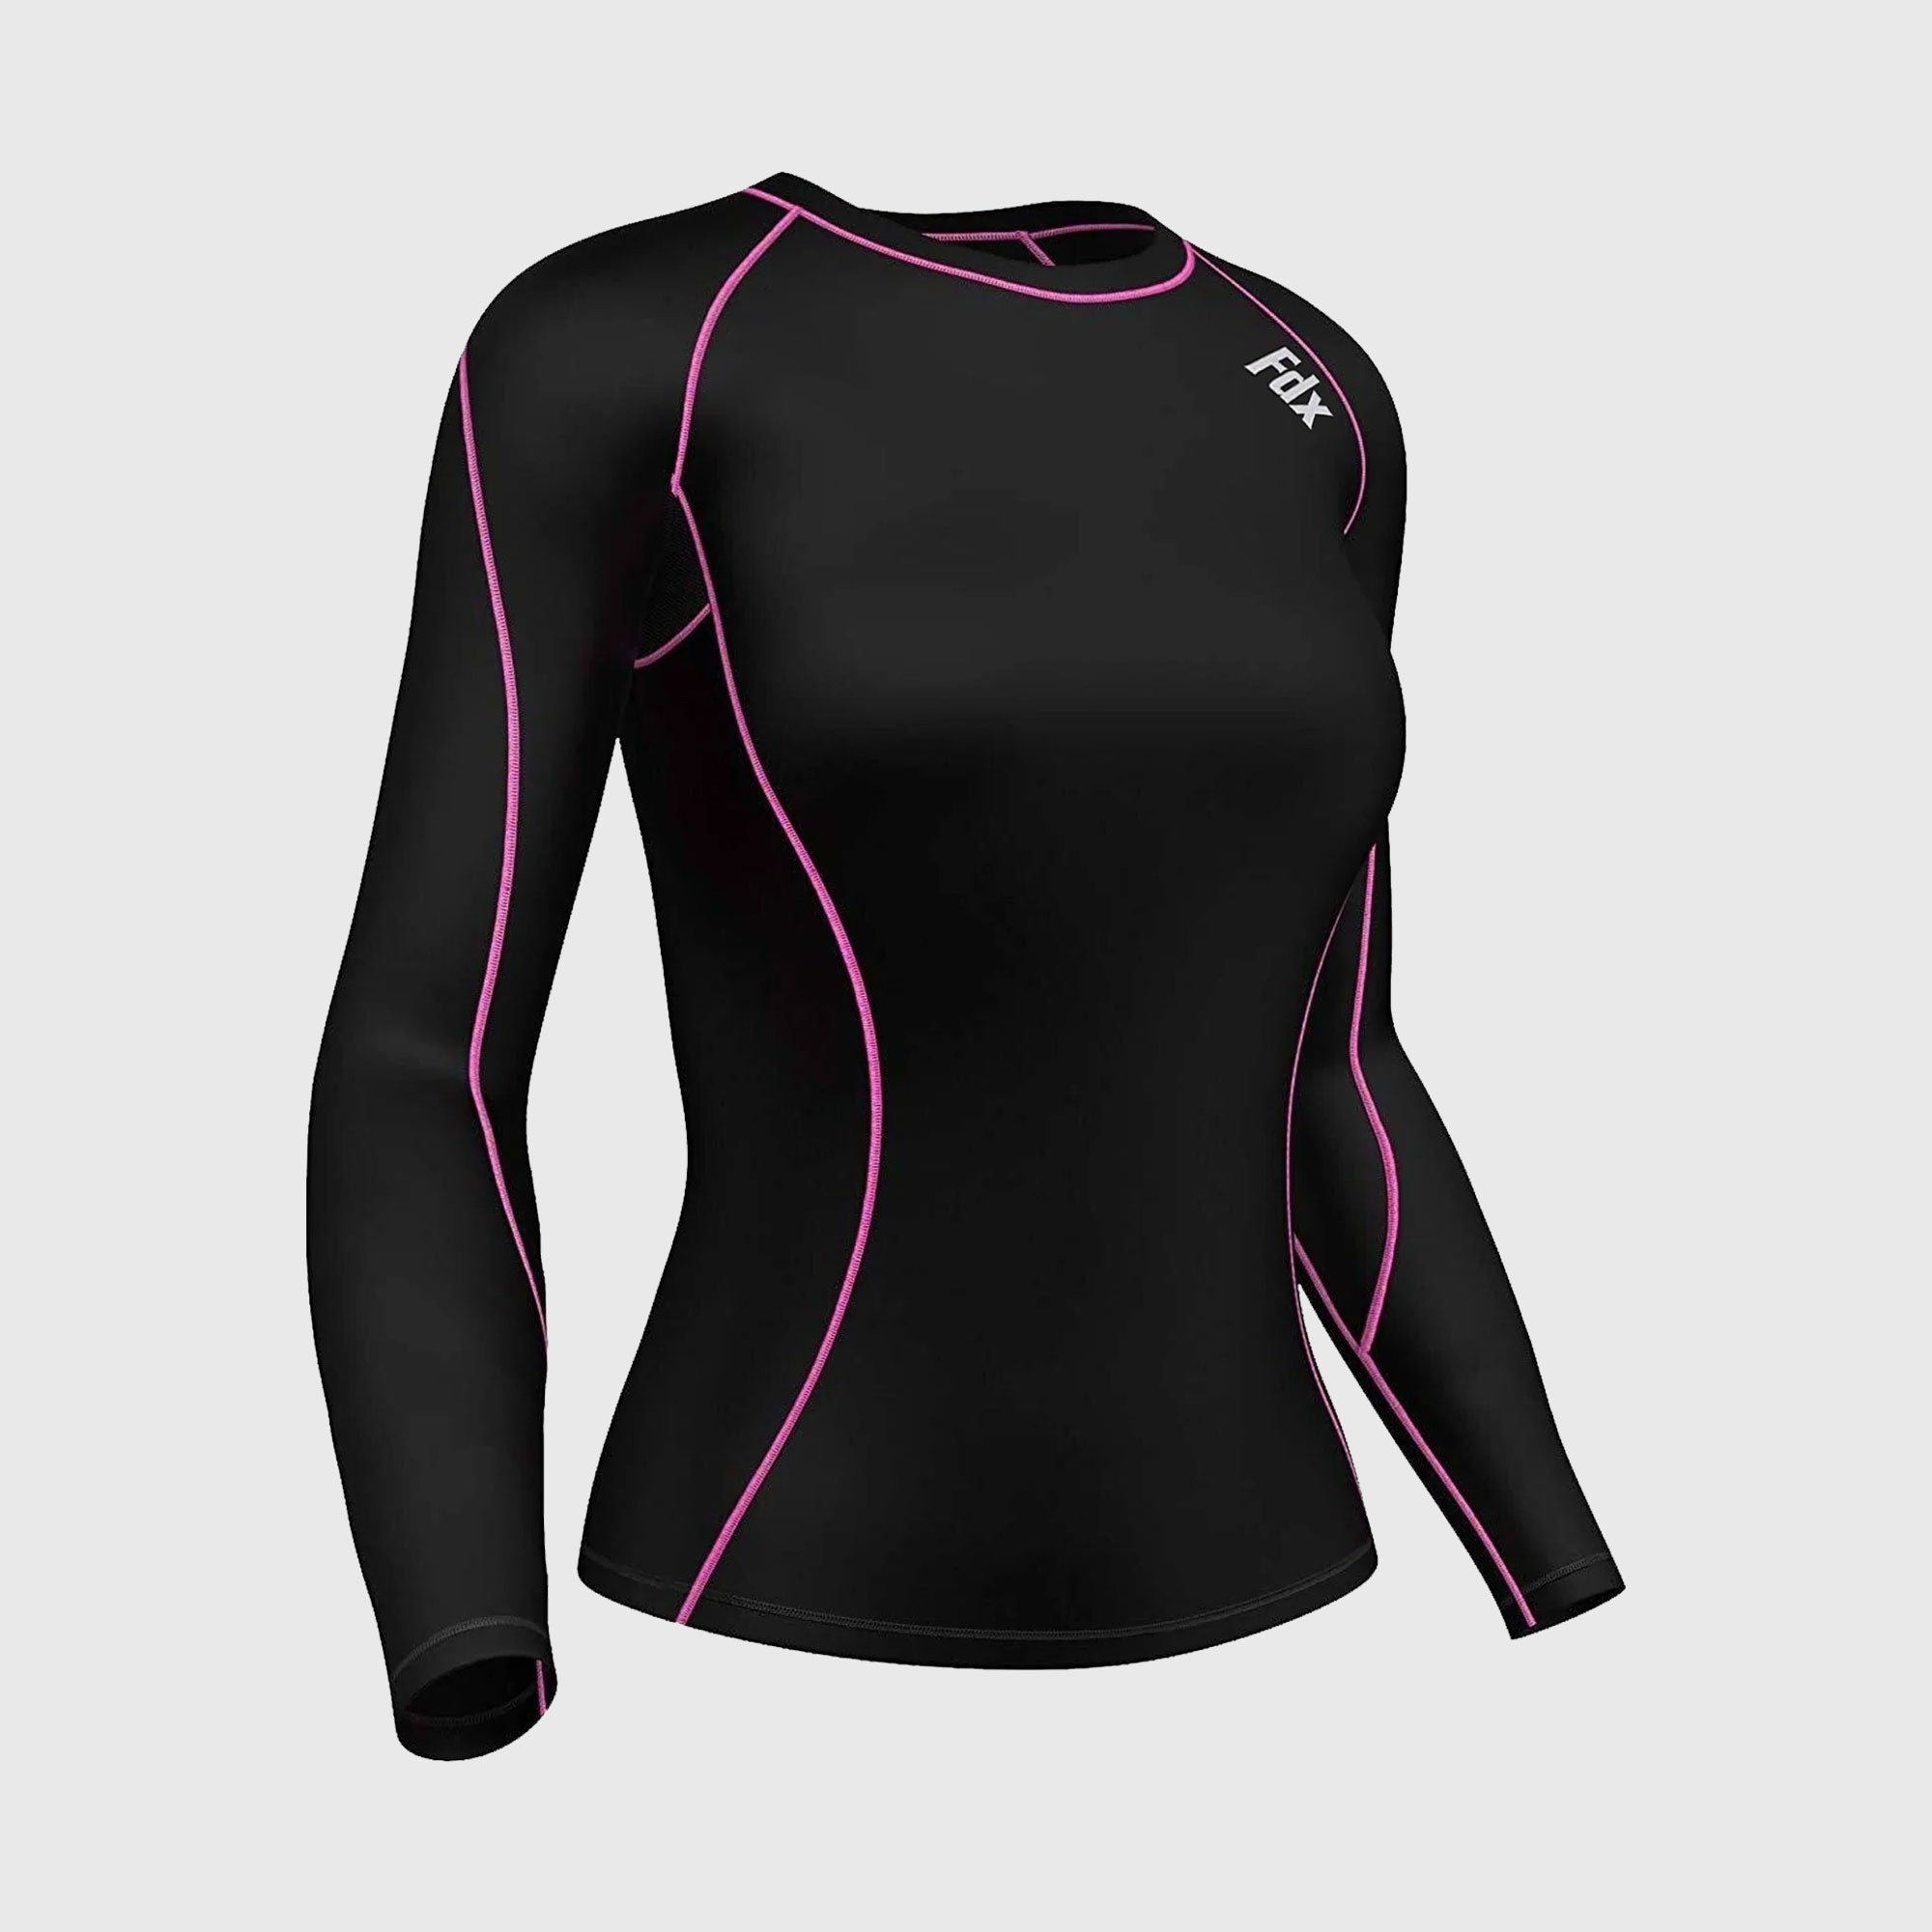 Fdx Women's Black & pink Long Sleeve Ultralight Compression Top Running Gym Workout Wear Rash Guard Stretchable Breathable Quick Dry - Monarch